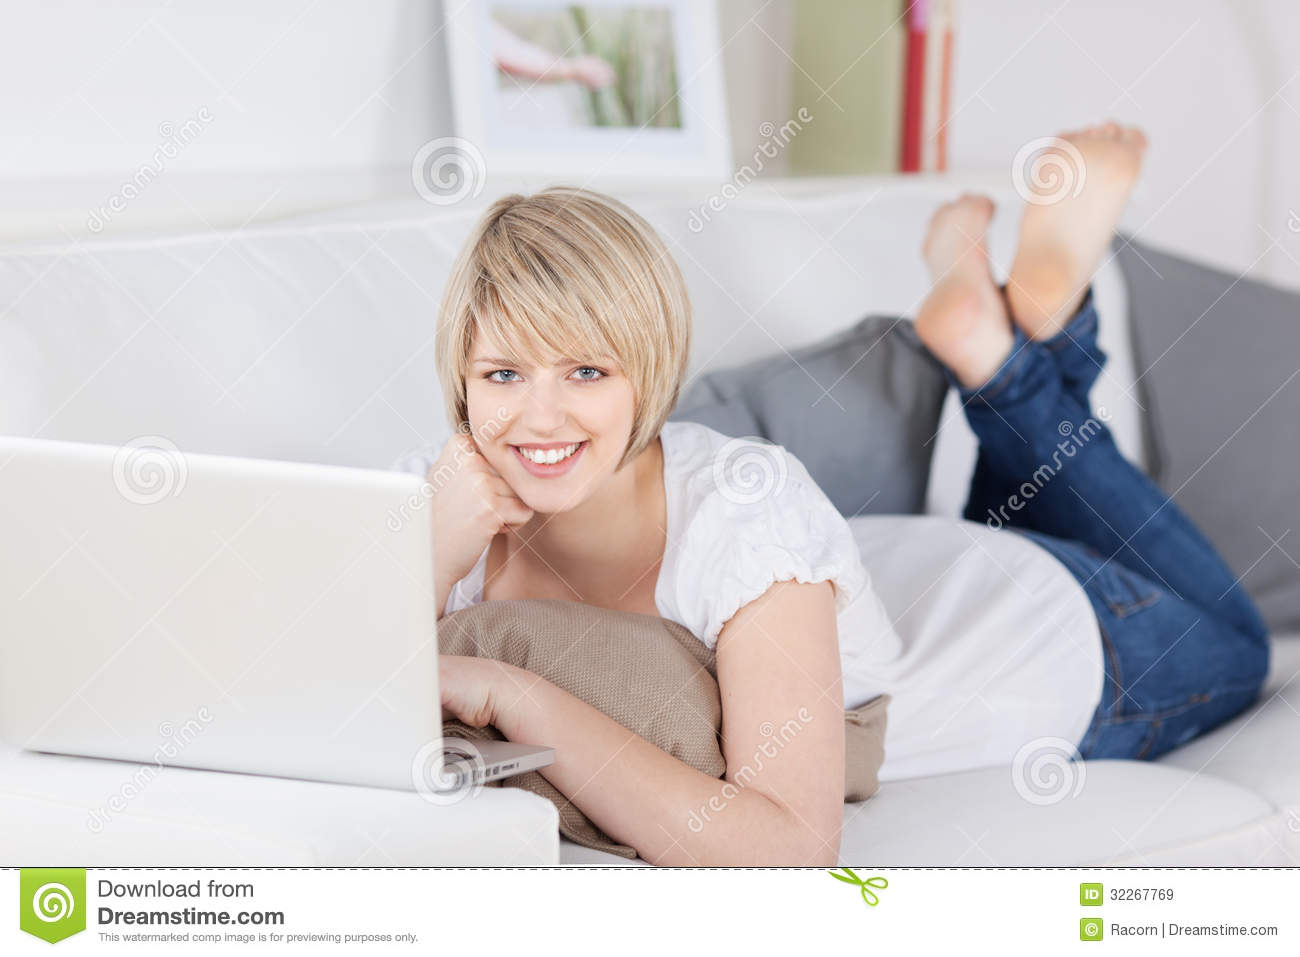 Friendly Young Woman With A Laptop On A Sofa Royalty Free Stock Images